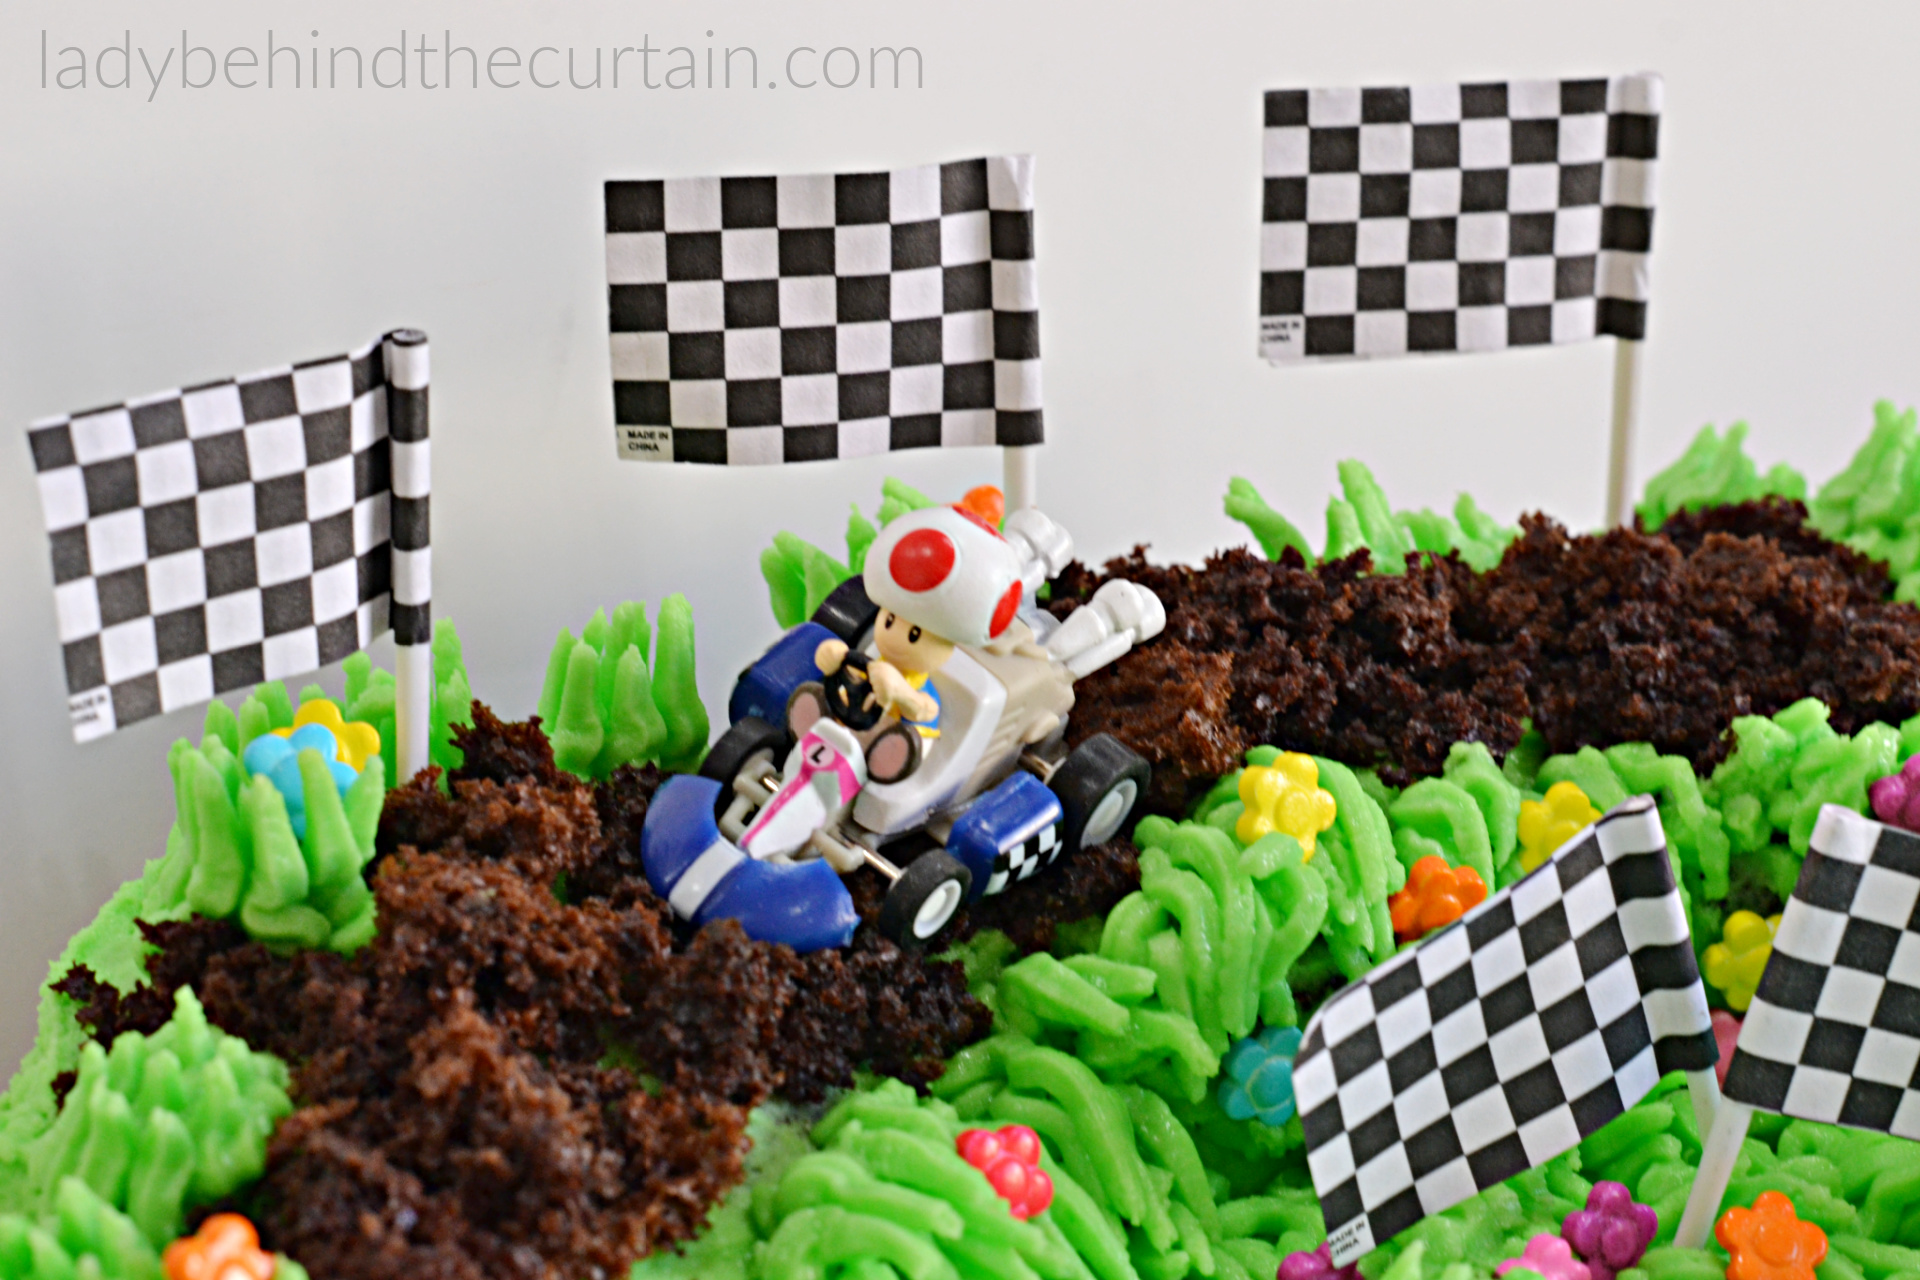 Decoration Super Mario Birthday Party Ideas: 10 Creative Ways to Bring the Game to Life